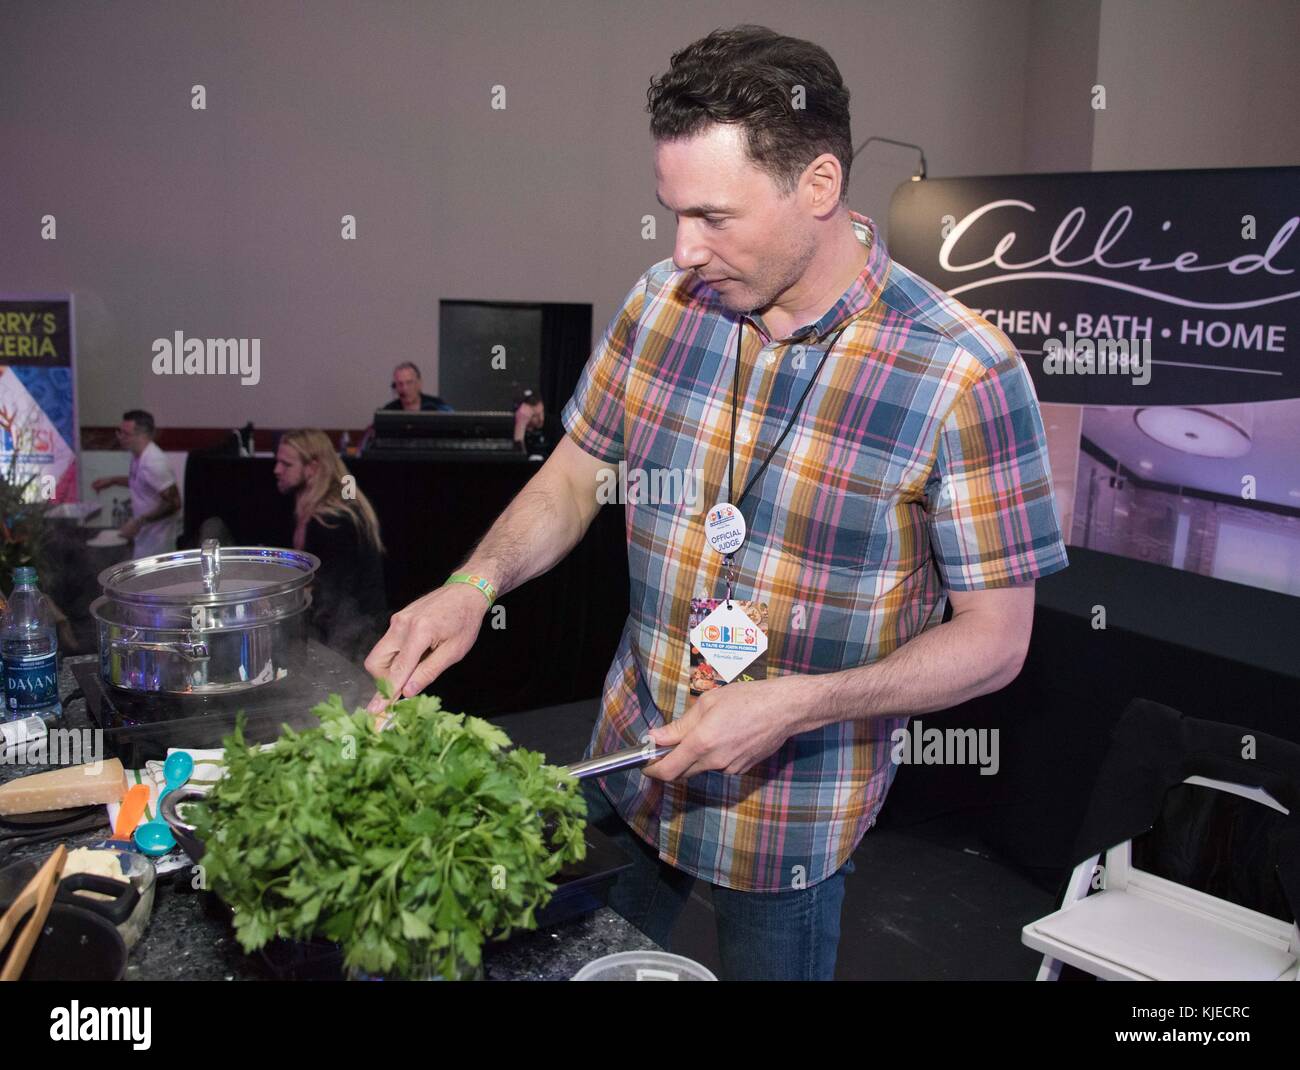 HALLANDALE, FL - MAY 20: Rocco DiSpirito attends the Savor the flavors from South Florida's Top Restaurants at the Obies: A Taste of South Florida on May 20, 2016 in Hallandale, Florida.   People:  Rocco DiSpirito Stock Photo